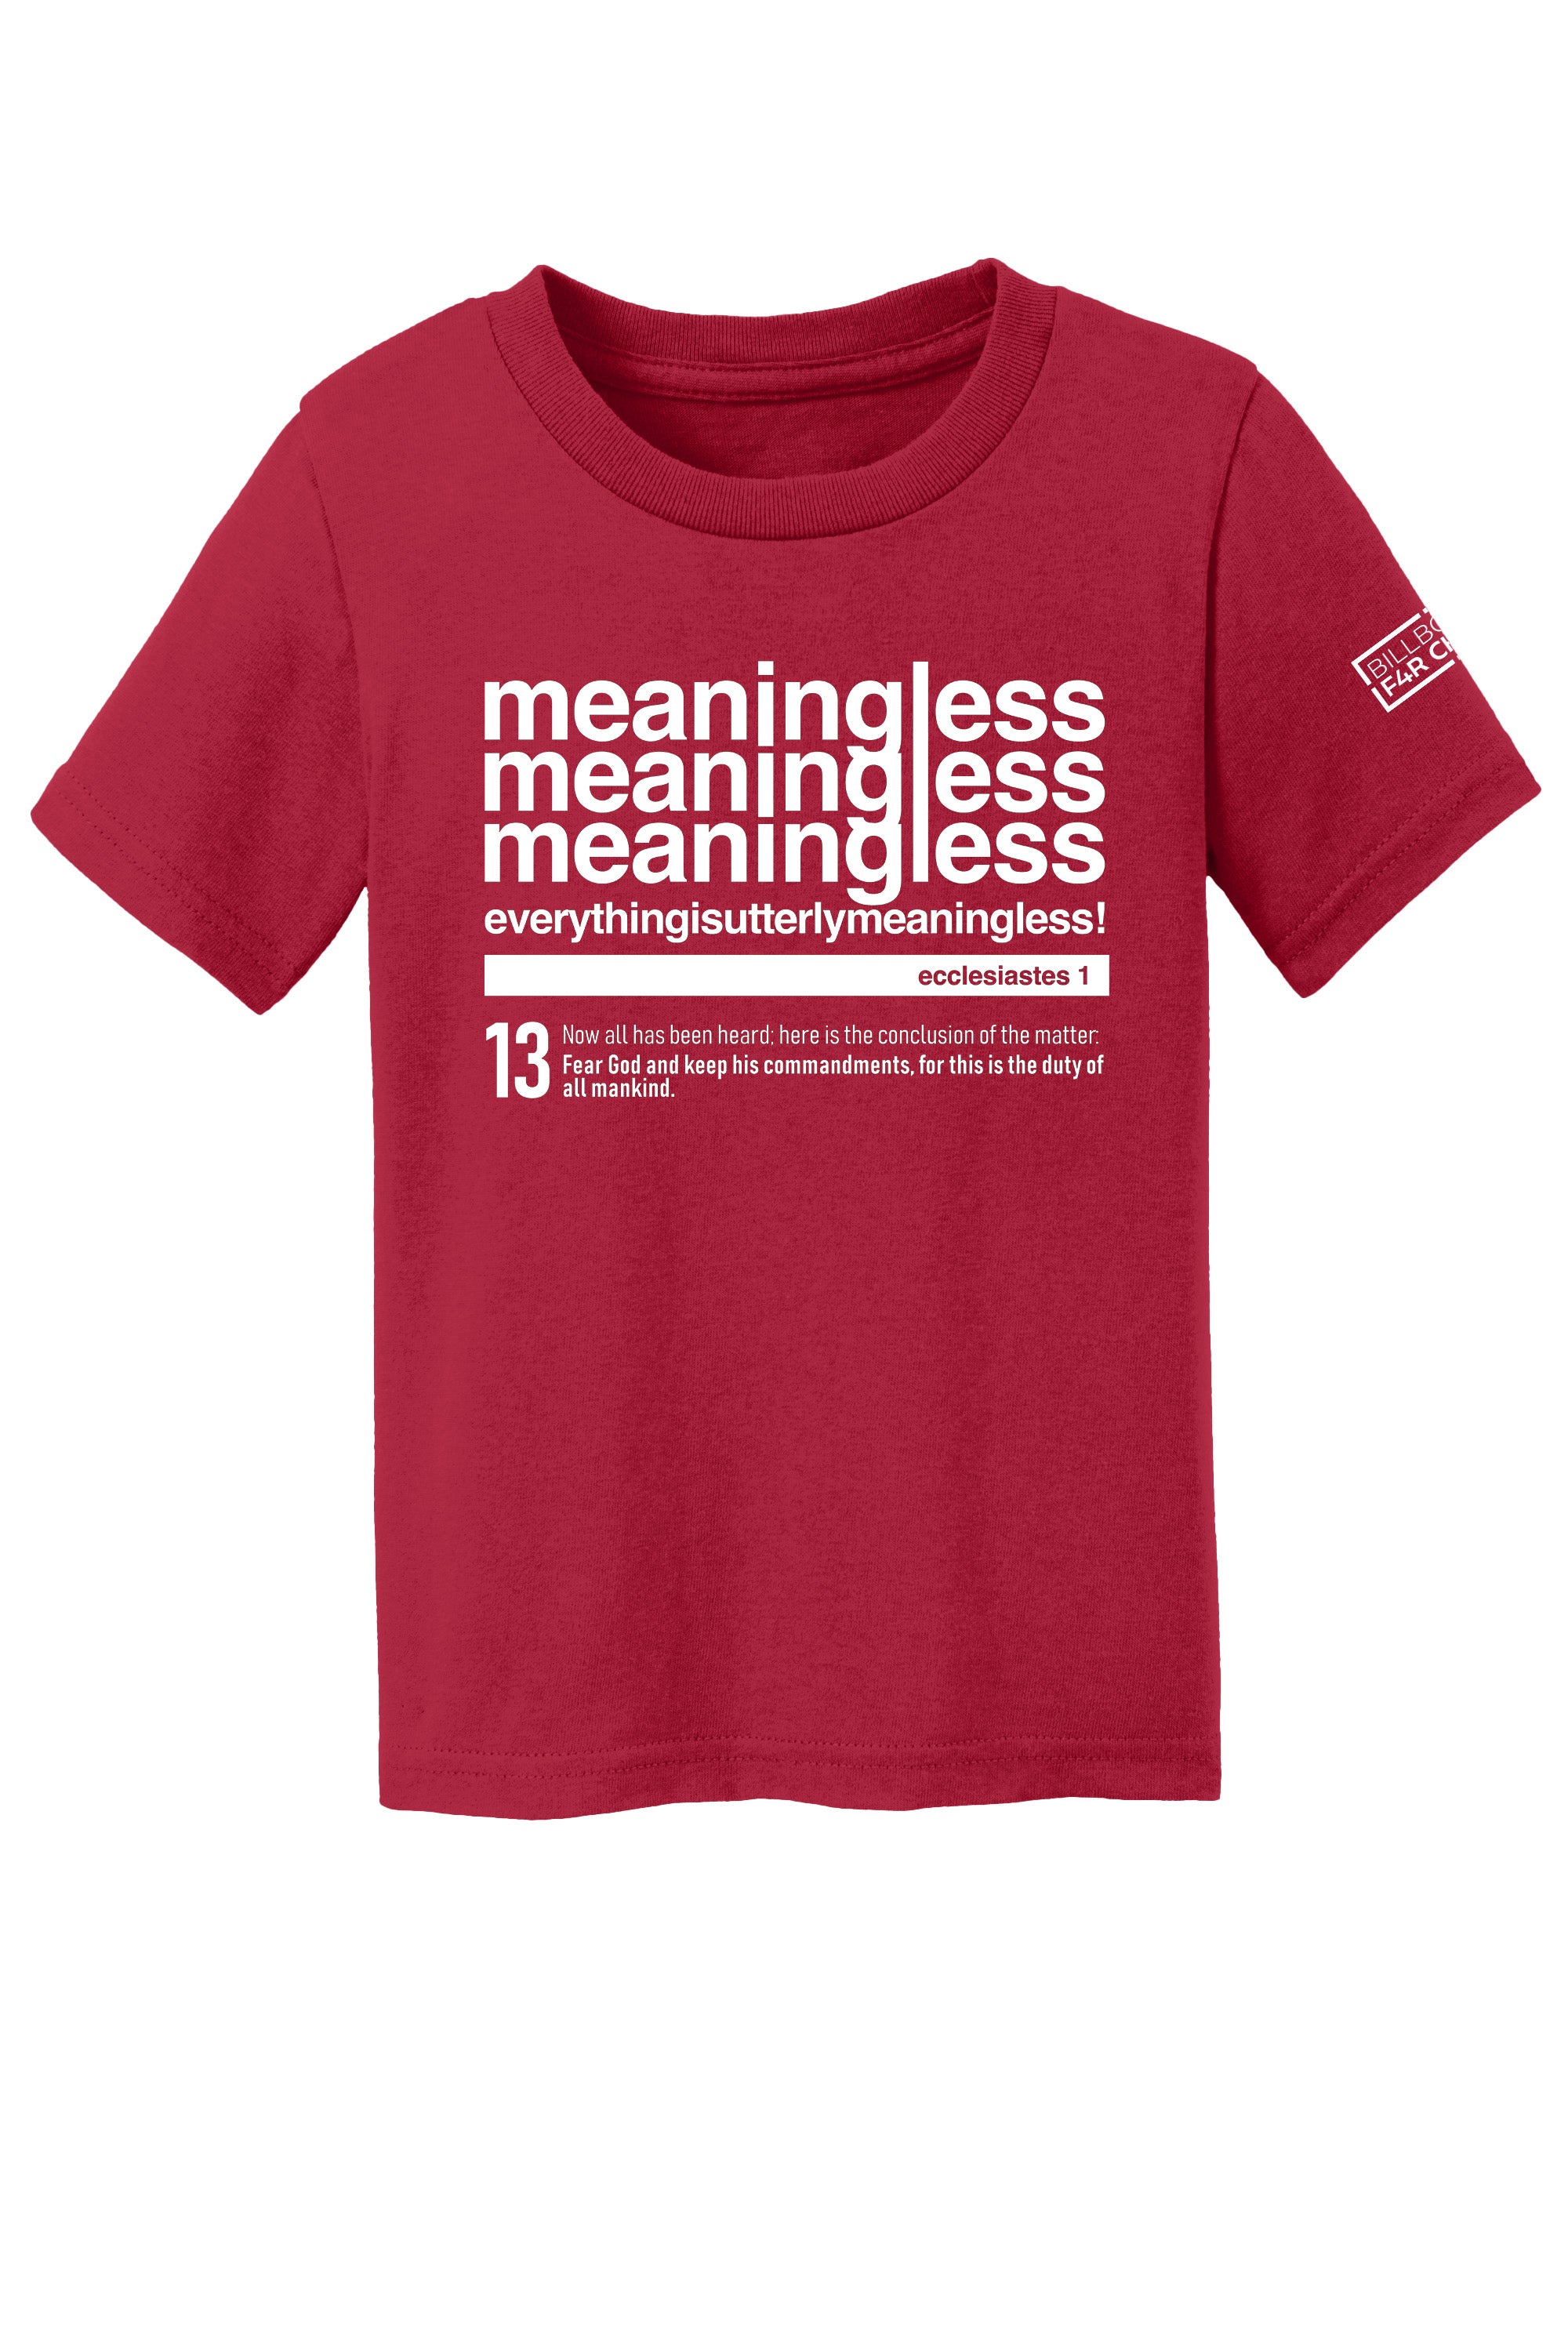 Meaningless 3 Toddler T-Shirt